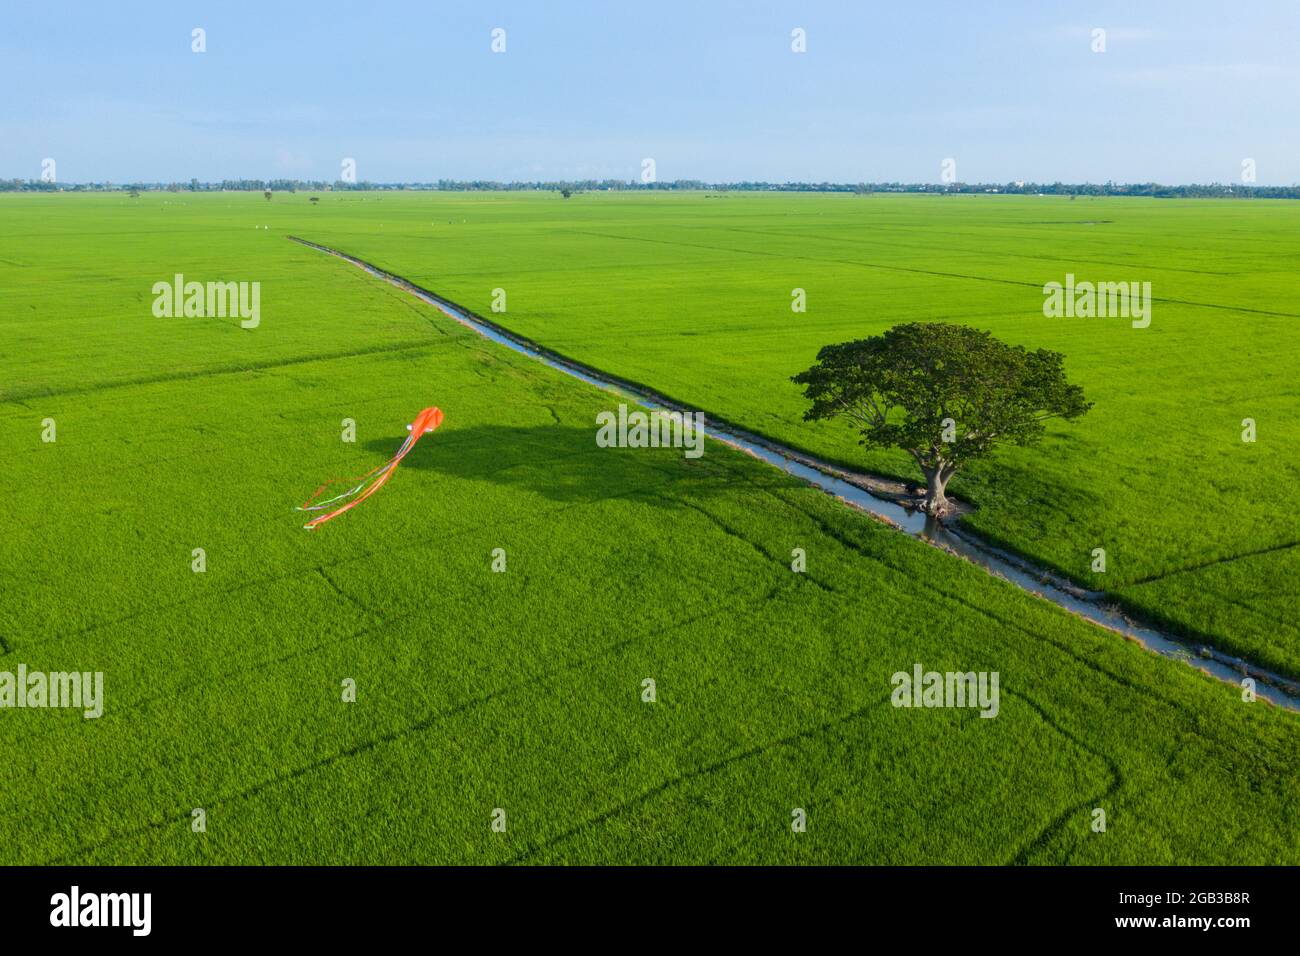 Summer field with kite fly on the sunset sky. Beautiful nature landscape, vacation background, famous travel destination. Peaceful landscape Stock Photo